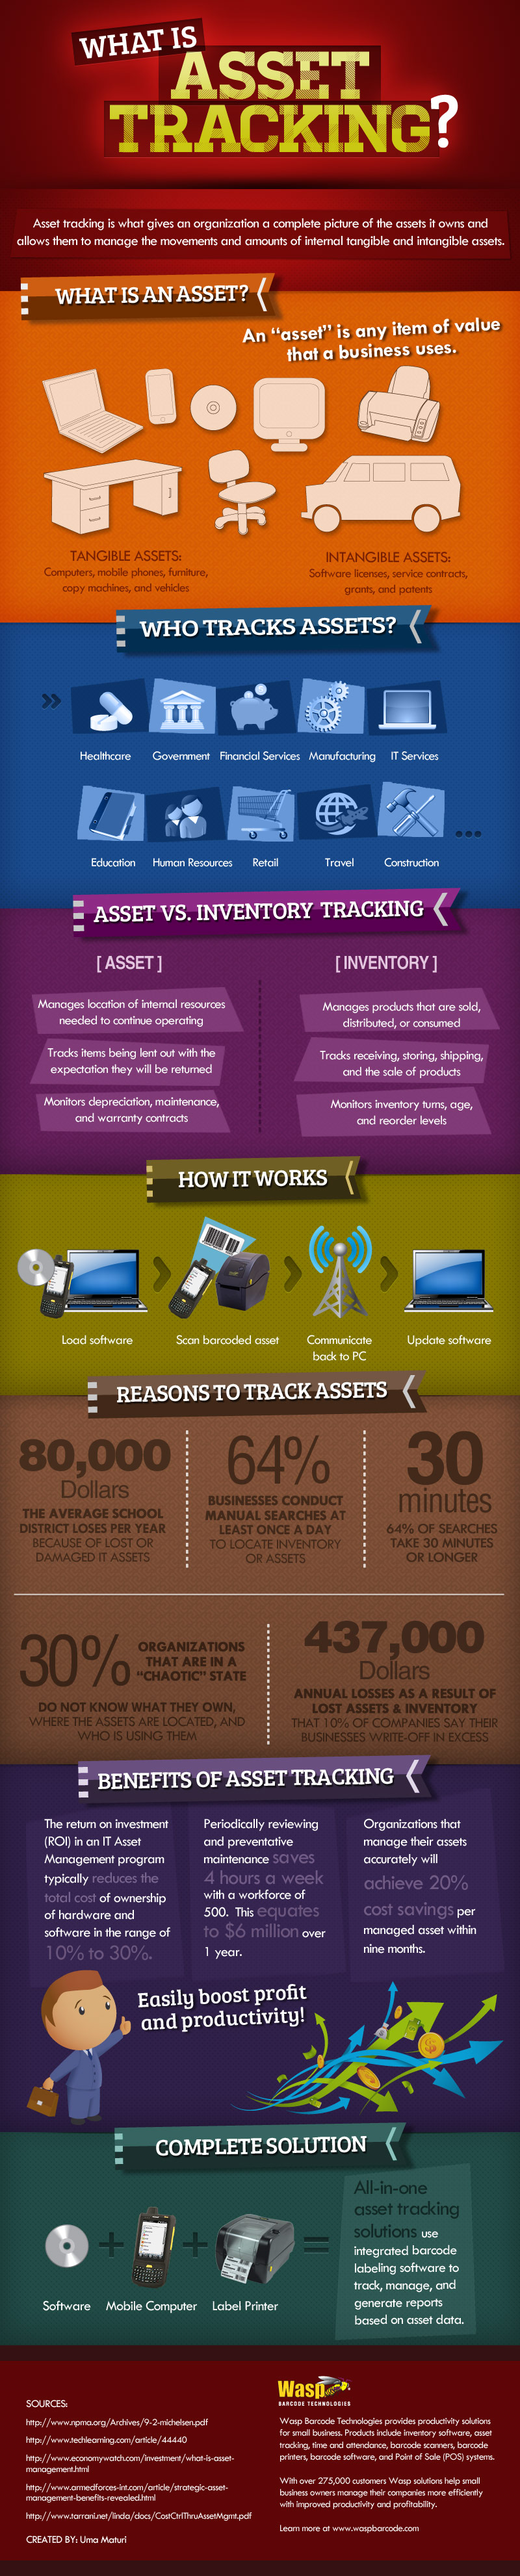 Asset Tracking 101 infographic